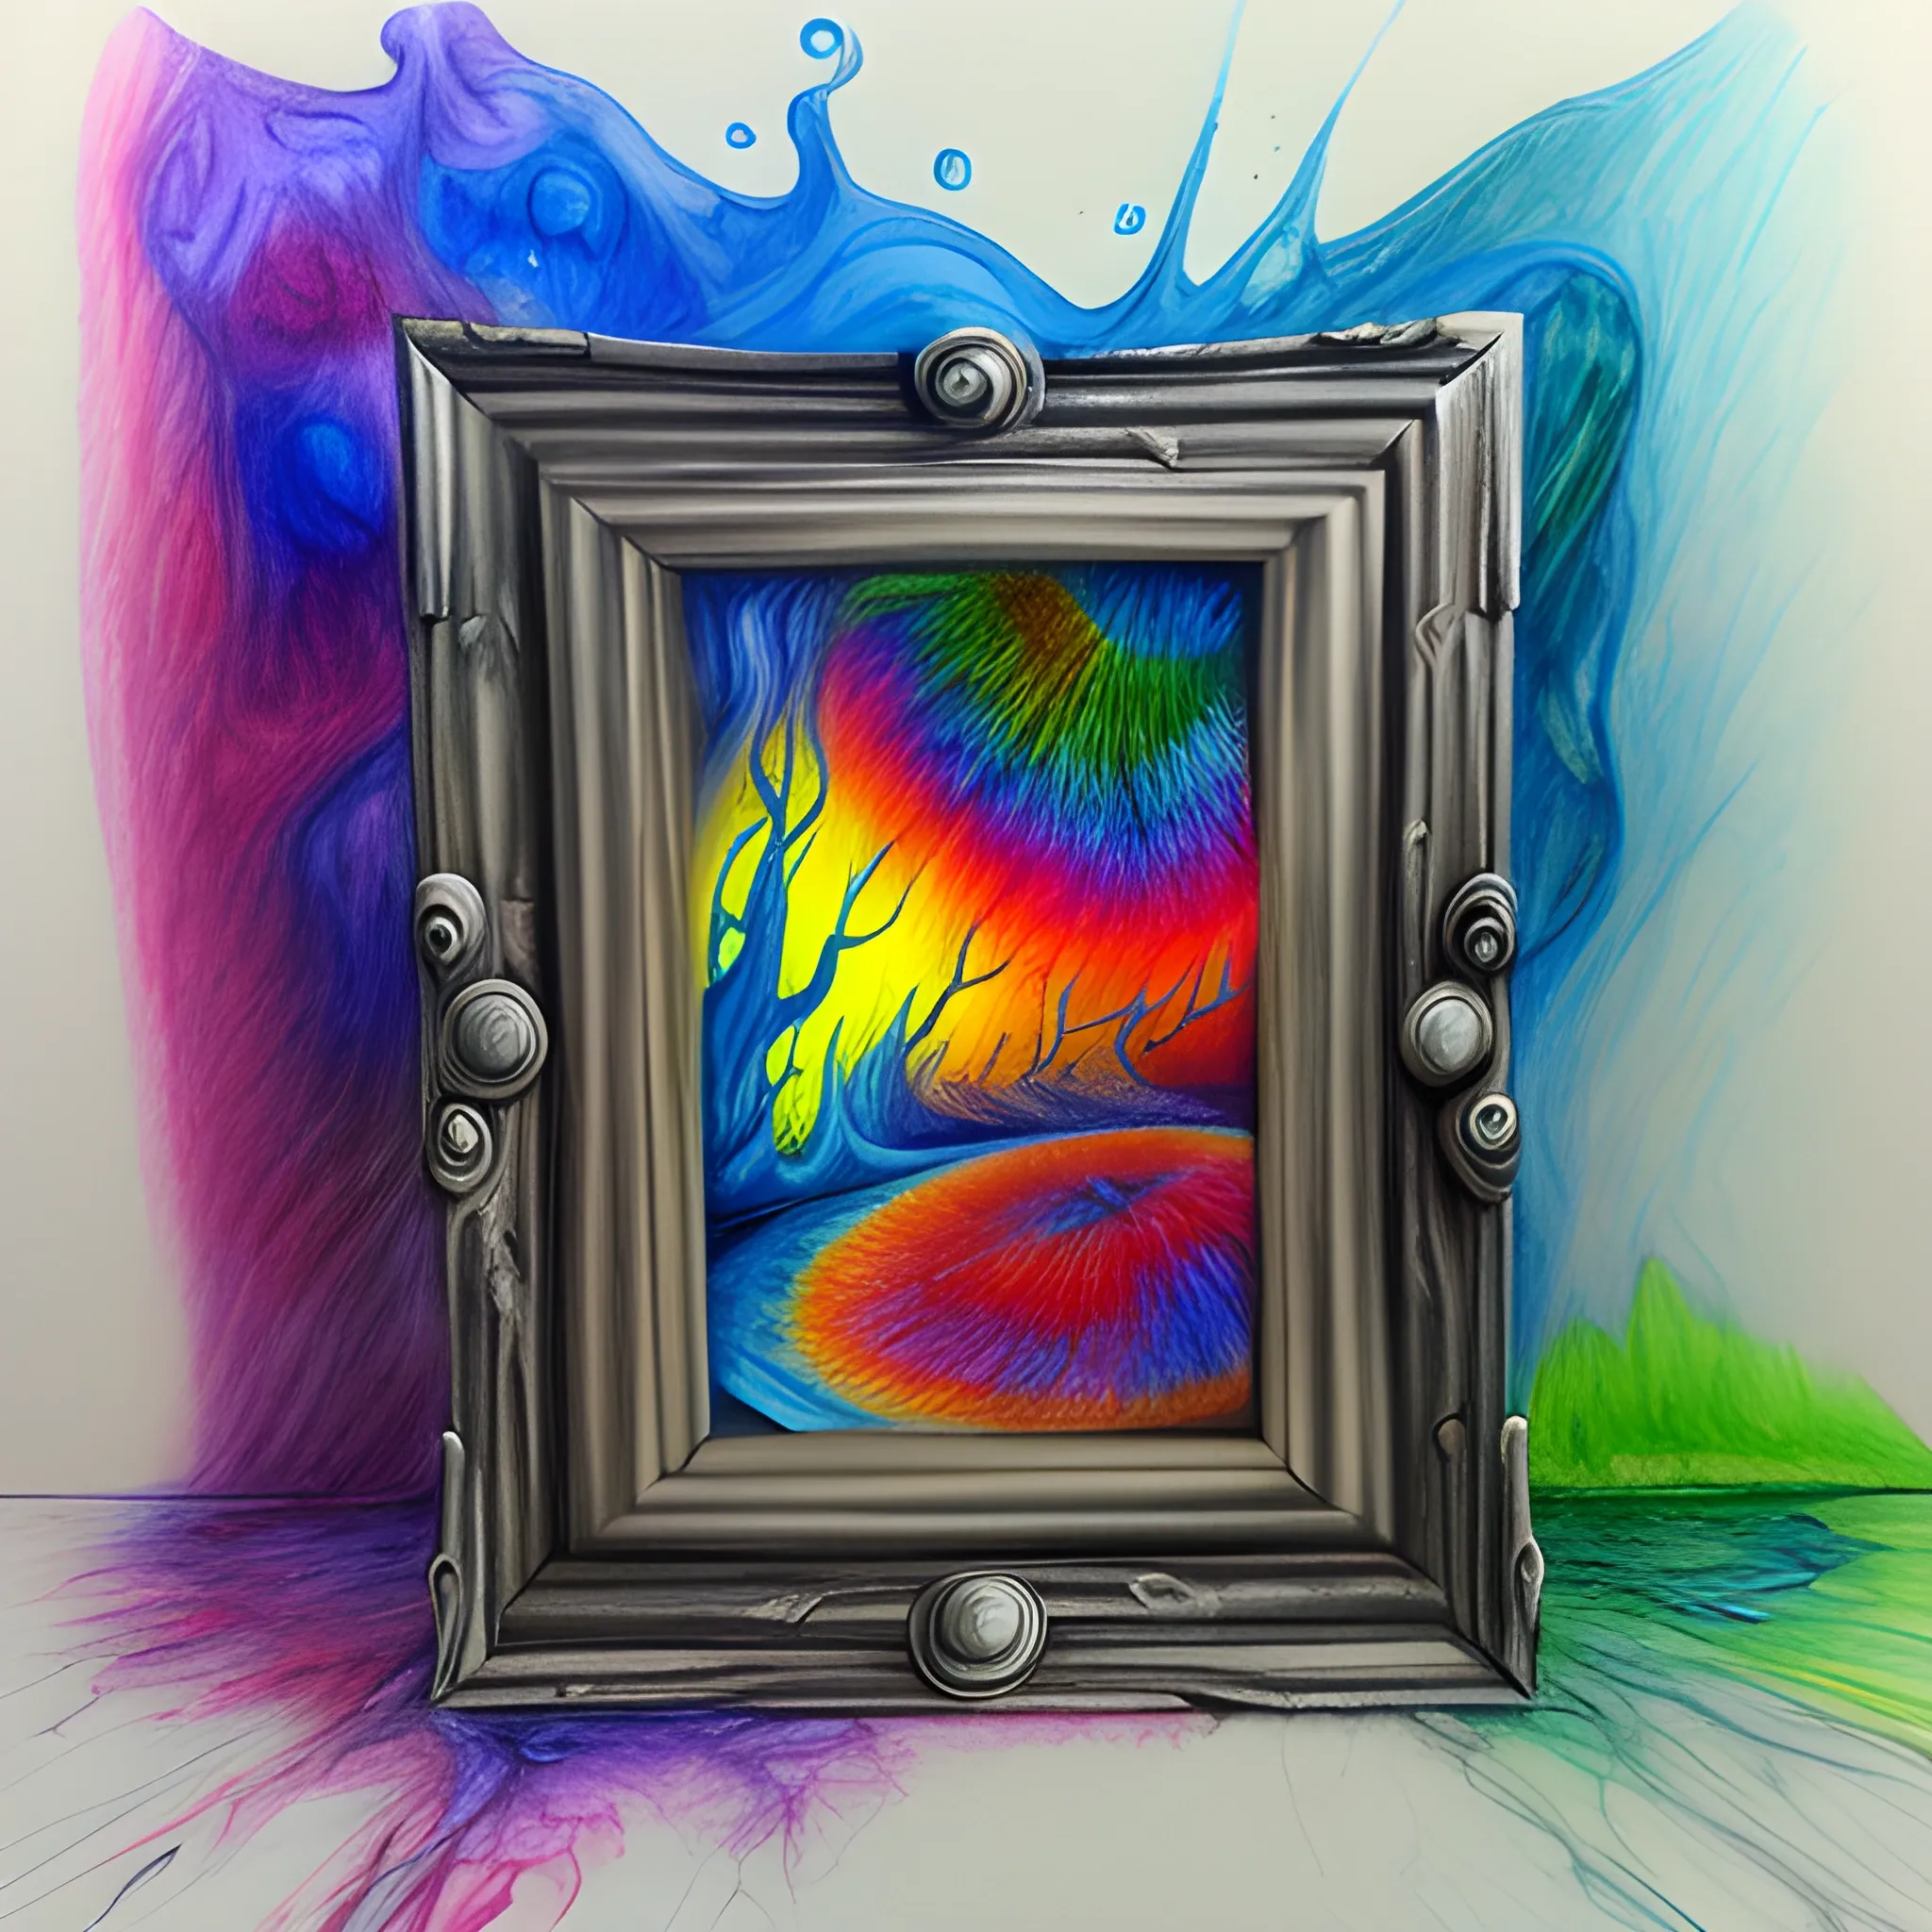 , Pencil Sketch, 3D, Trippy, Oil Painting, Water Color